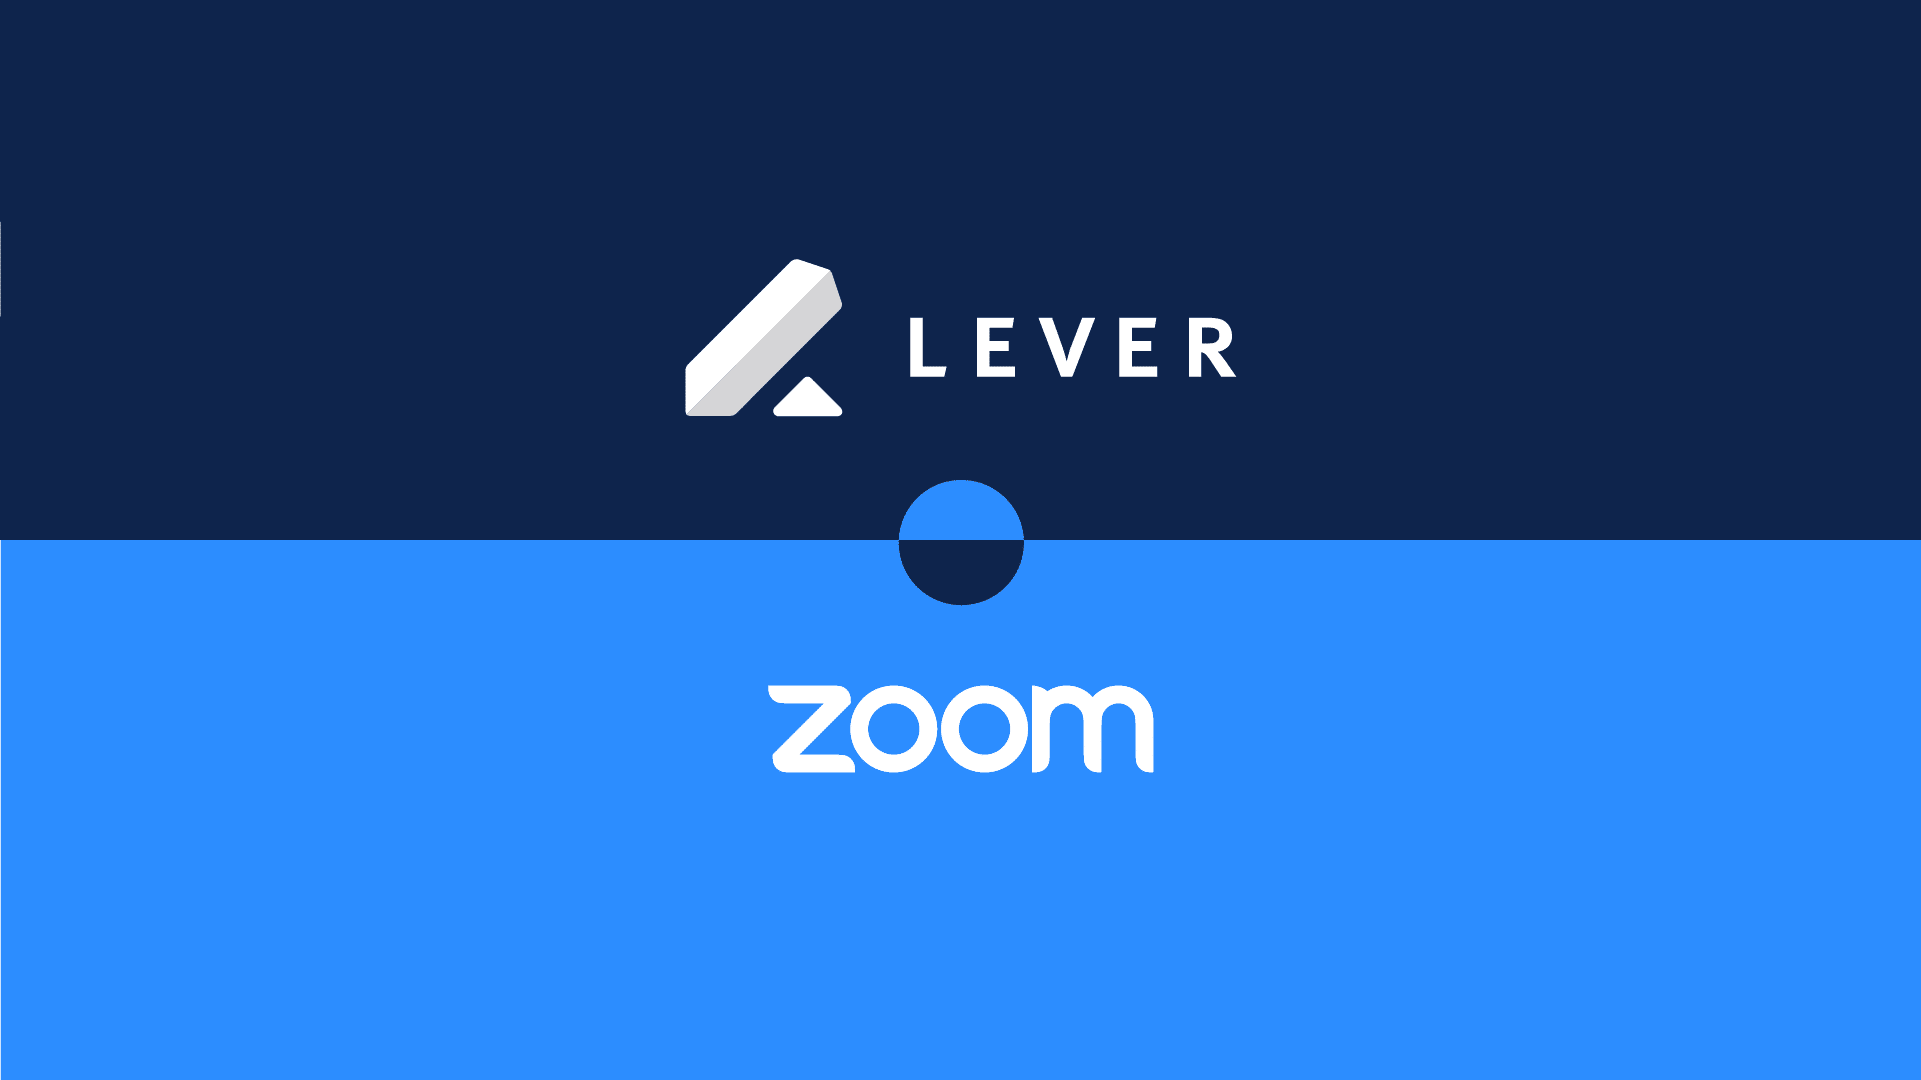 Zoom and Lever Blog Announcement Banner